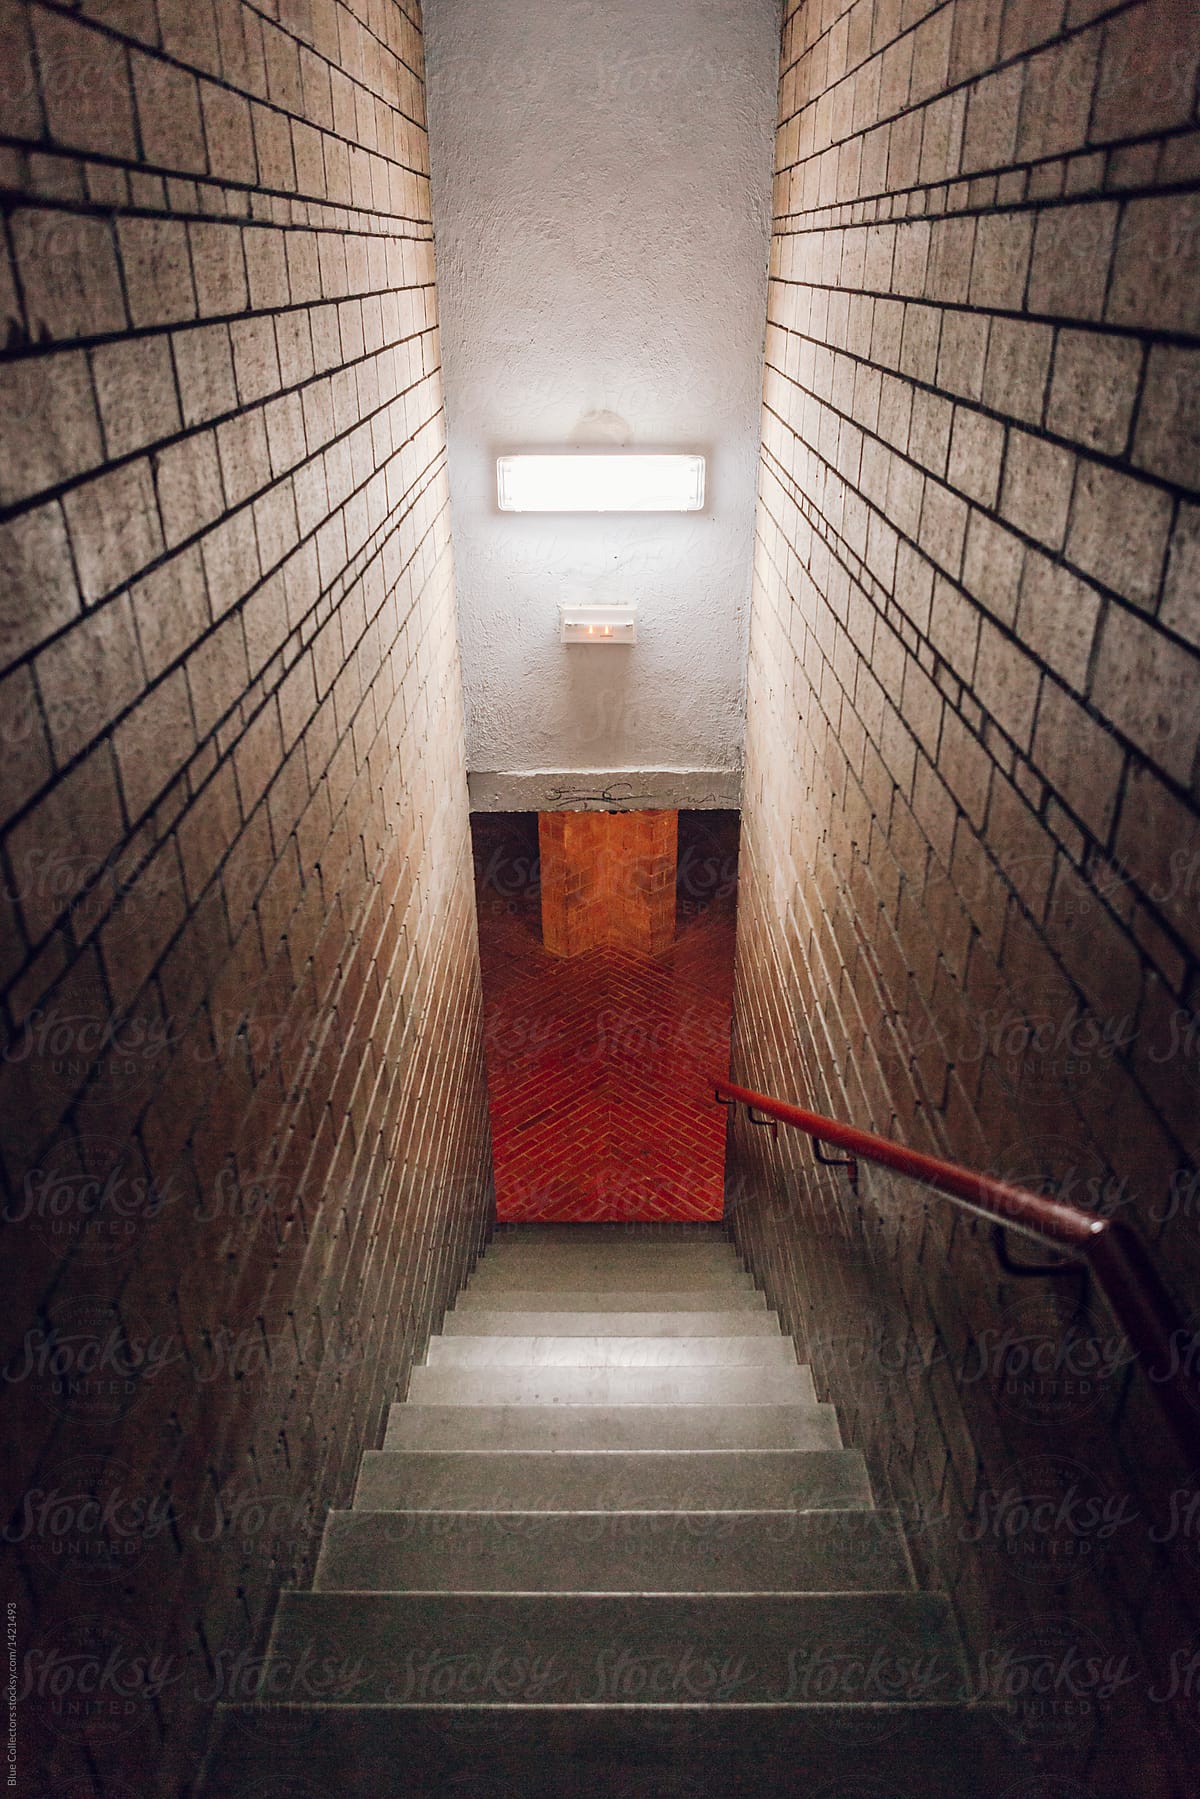 Stairs seen from above inside a building